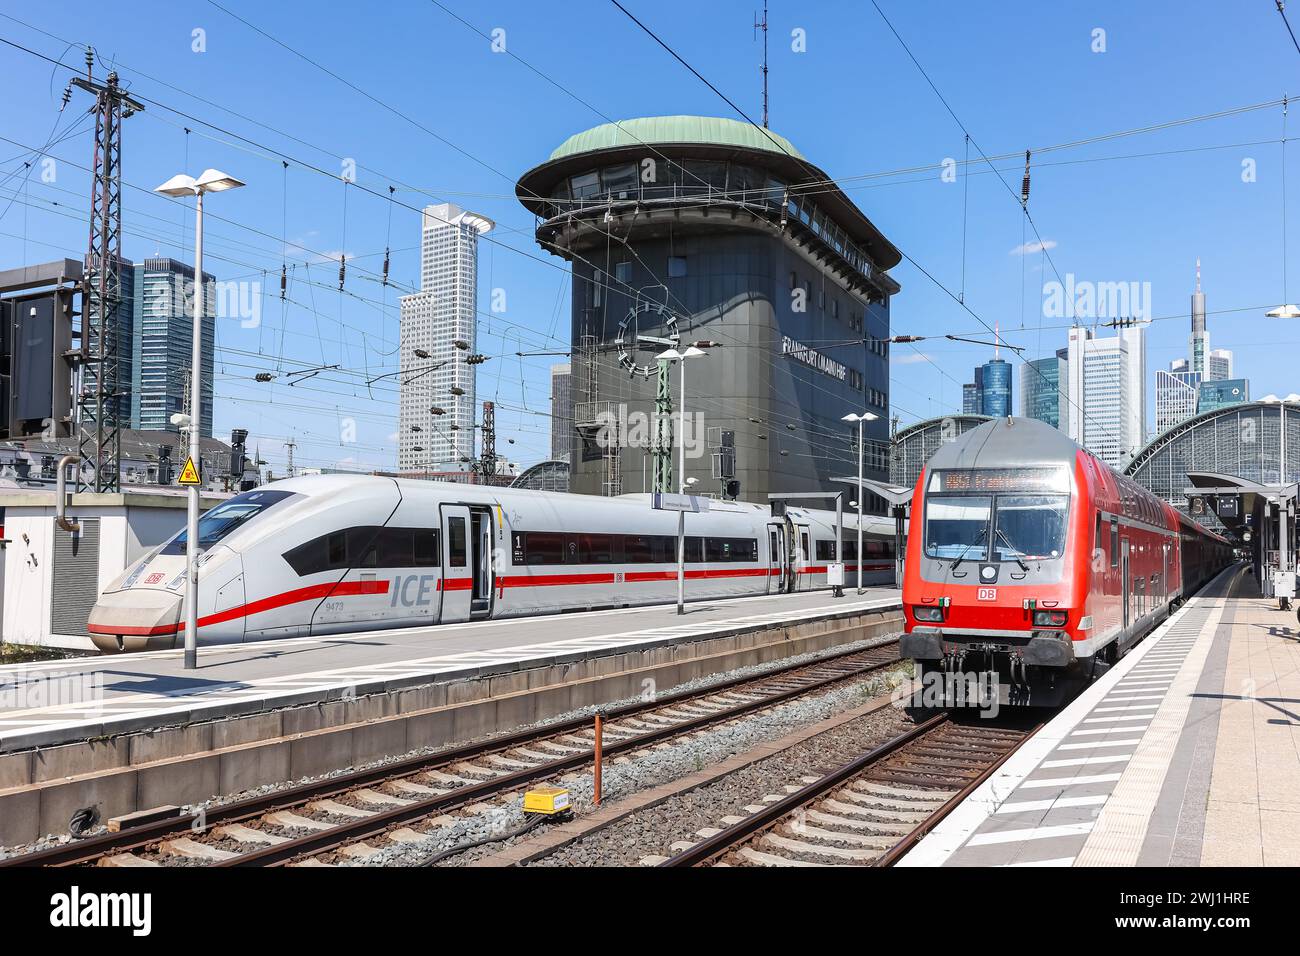 ICE train and regional trains of DB Deutsche Bahn at Frankfurt Central Station, Germany Stock Photo